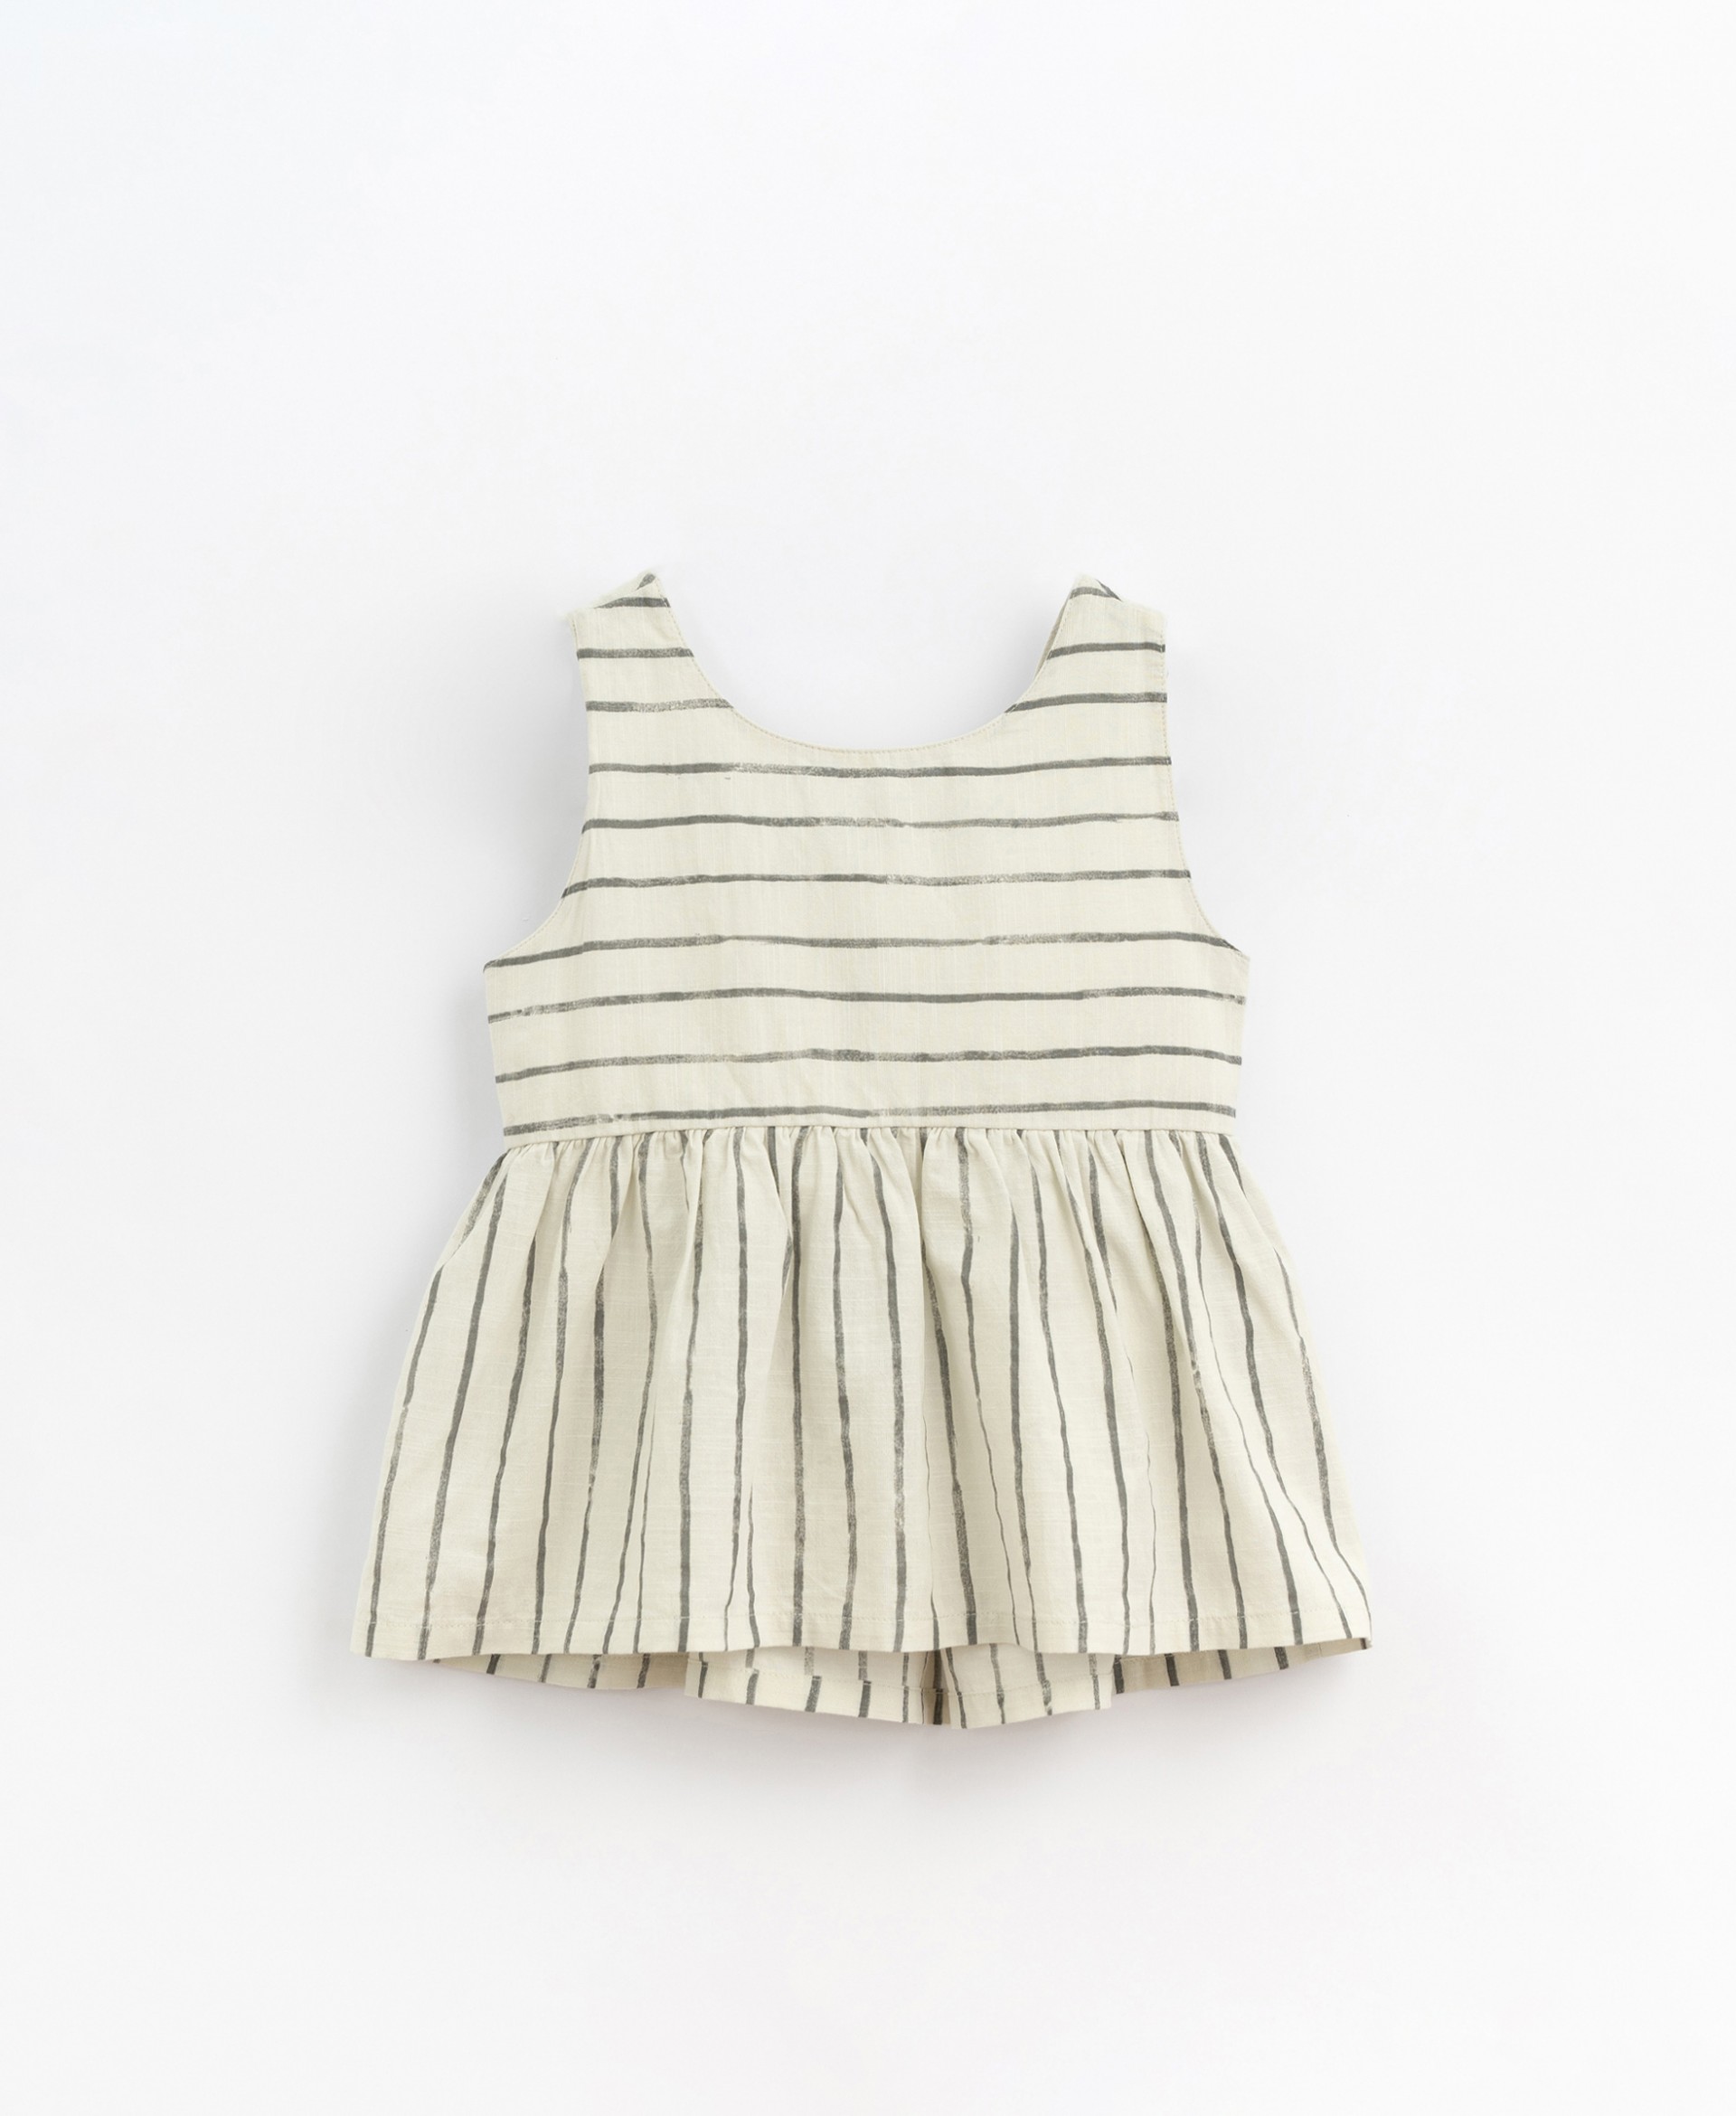 Tunic in striped fabric | Basketry